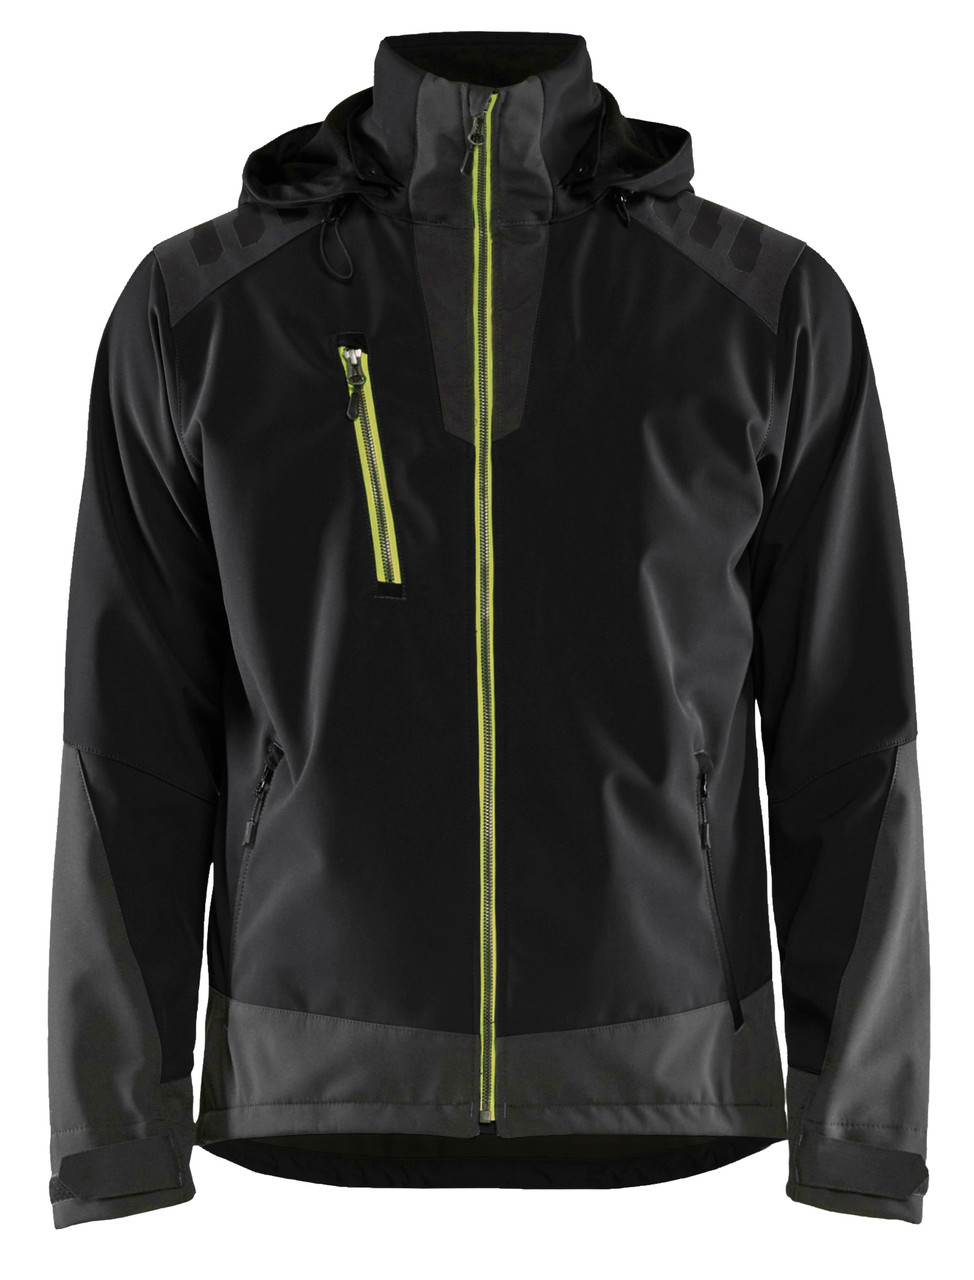 BLAKLADER Jacket  4749  with  for BLAKLADER Jacket  | 4749 Mens Black Full Zip Jacket in Waterproof Softshell that have Full Zip  available in Australia and New Zealand